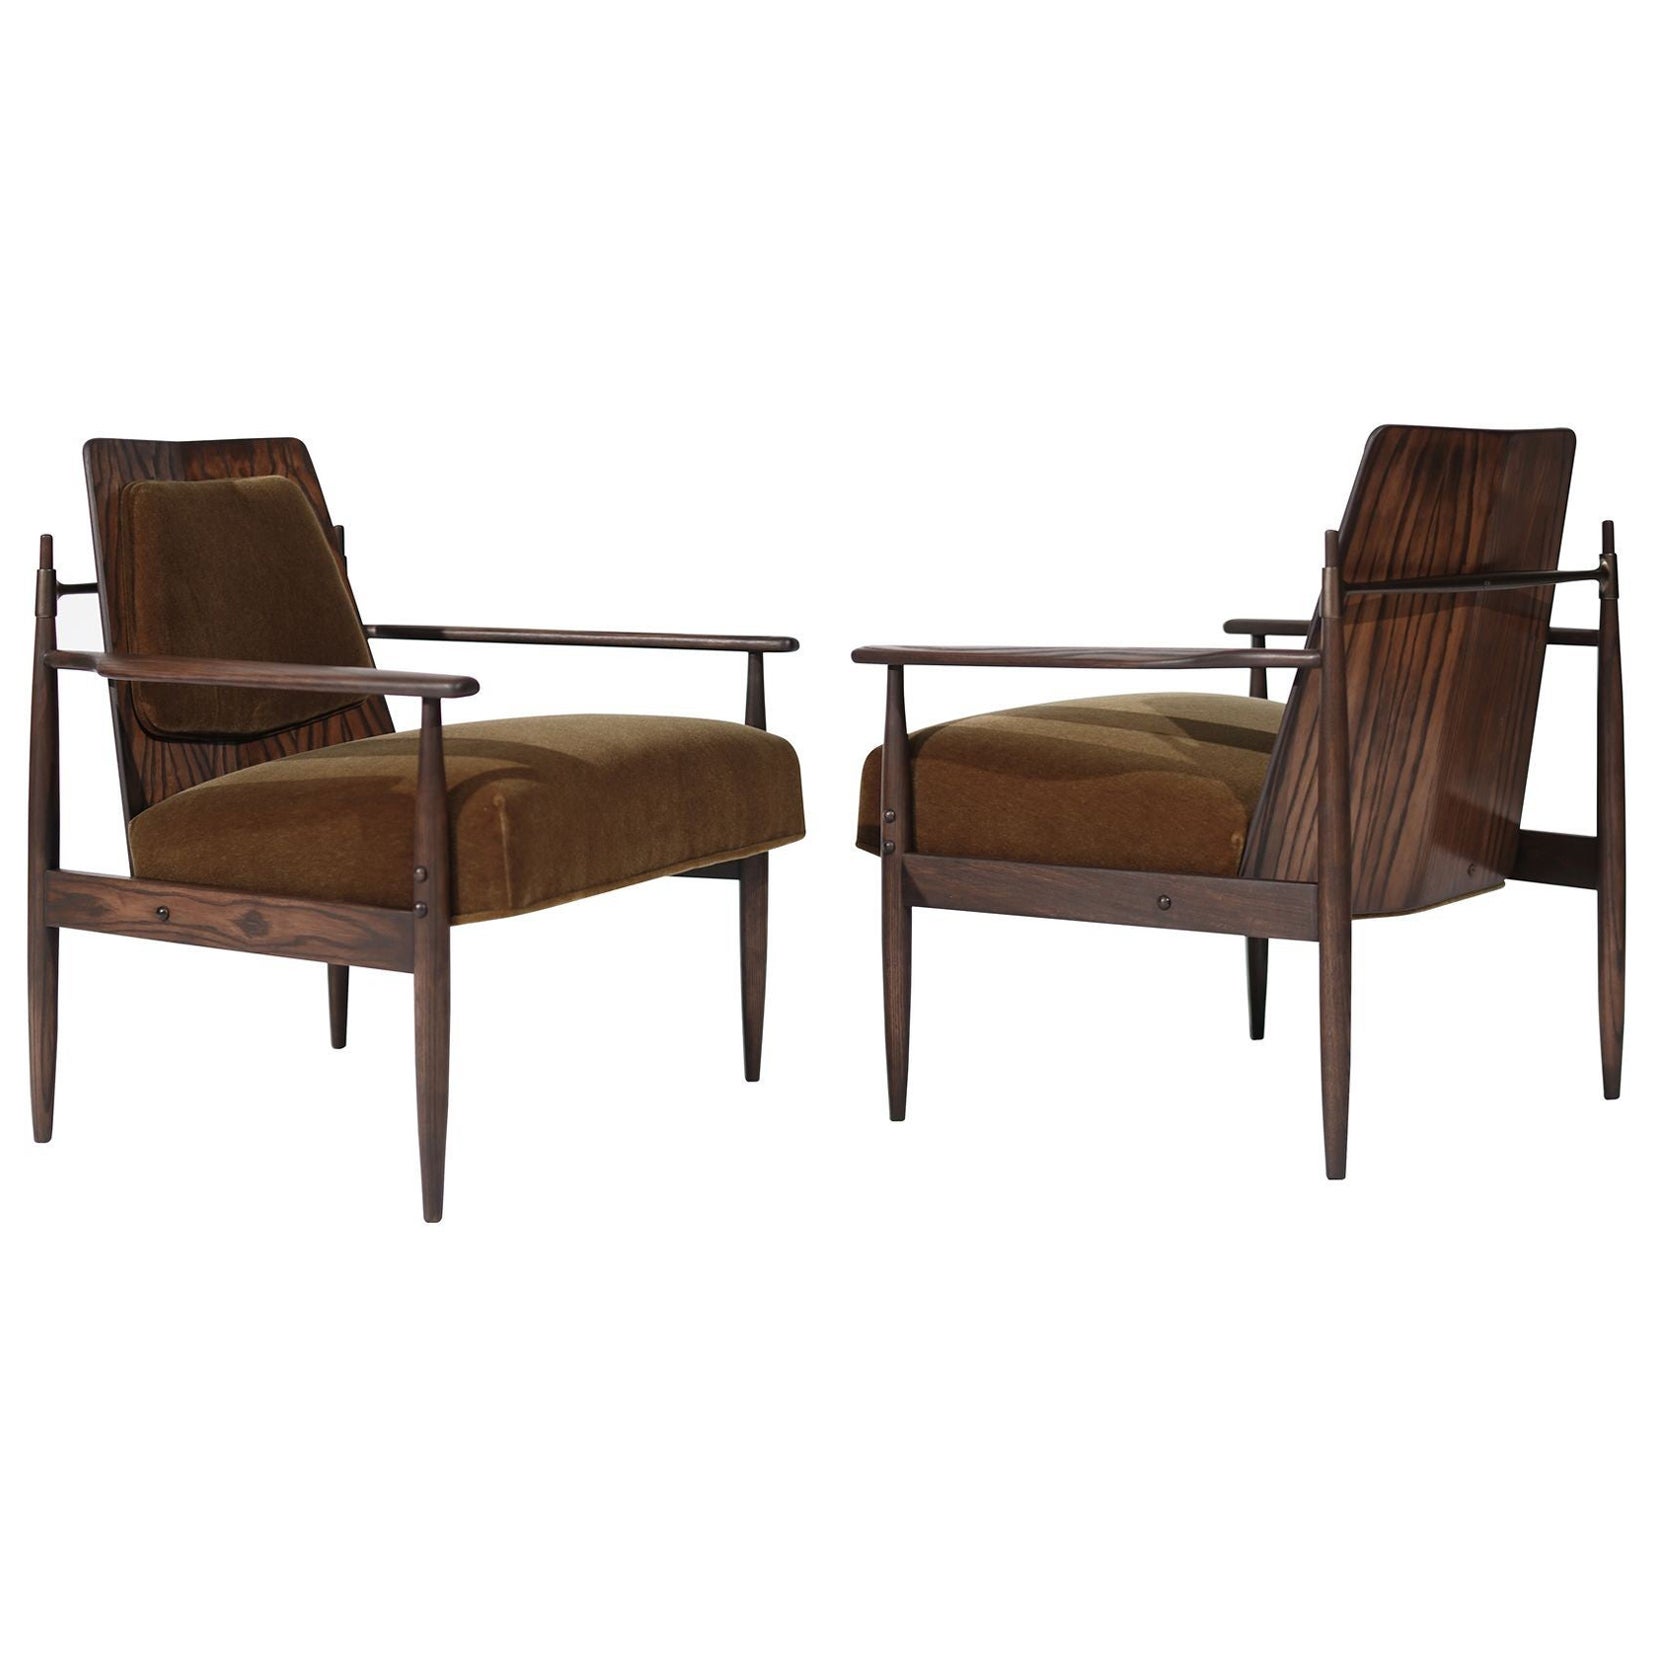 Set of Oak, Mohair and Bronze Lounge Chairs by Dan Johnson, C. 1950s For Sale